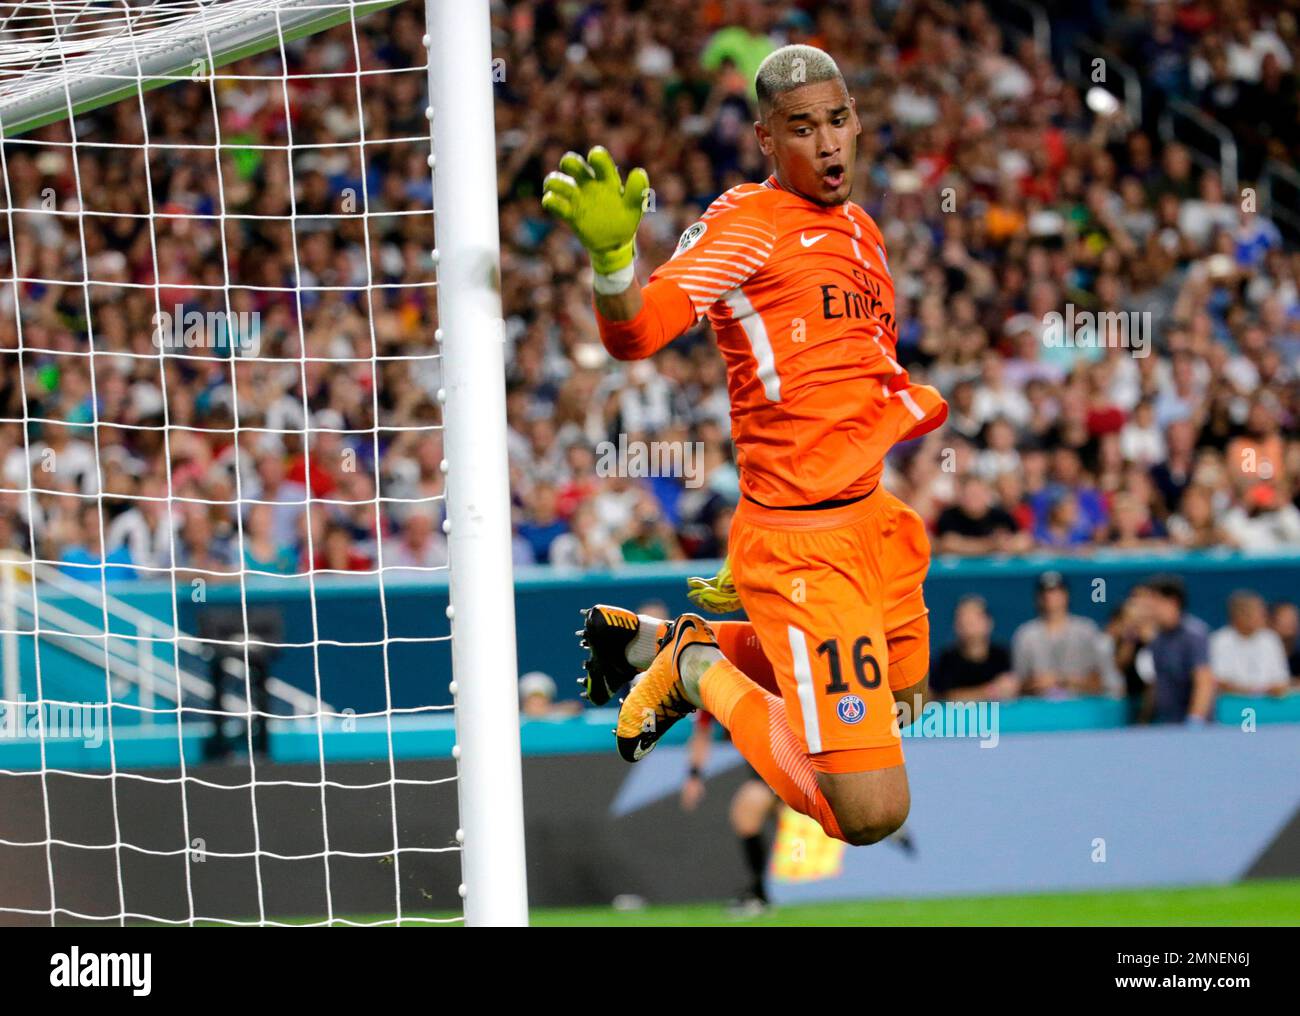 FILE - In this Wednesday, July 26, 2017 file photo, Paris Saint-Germain  goalkeeper Alphonse Areola defends during the first half of an  International Champions Cup soccer match against Juventus, in Miami Gardens,